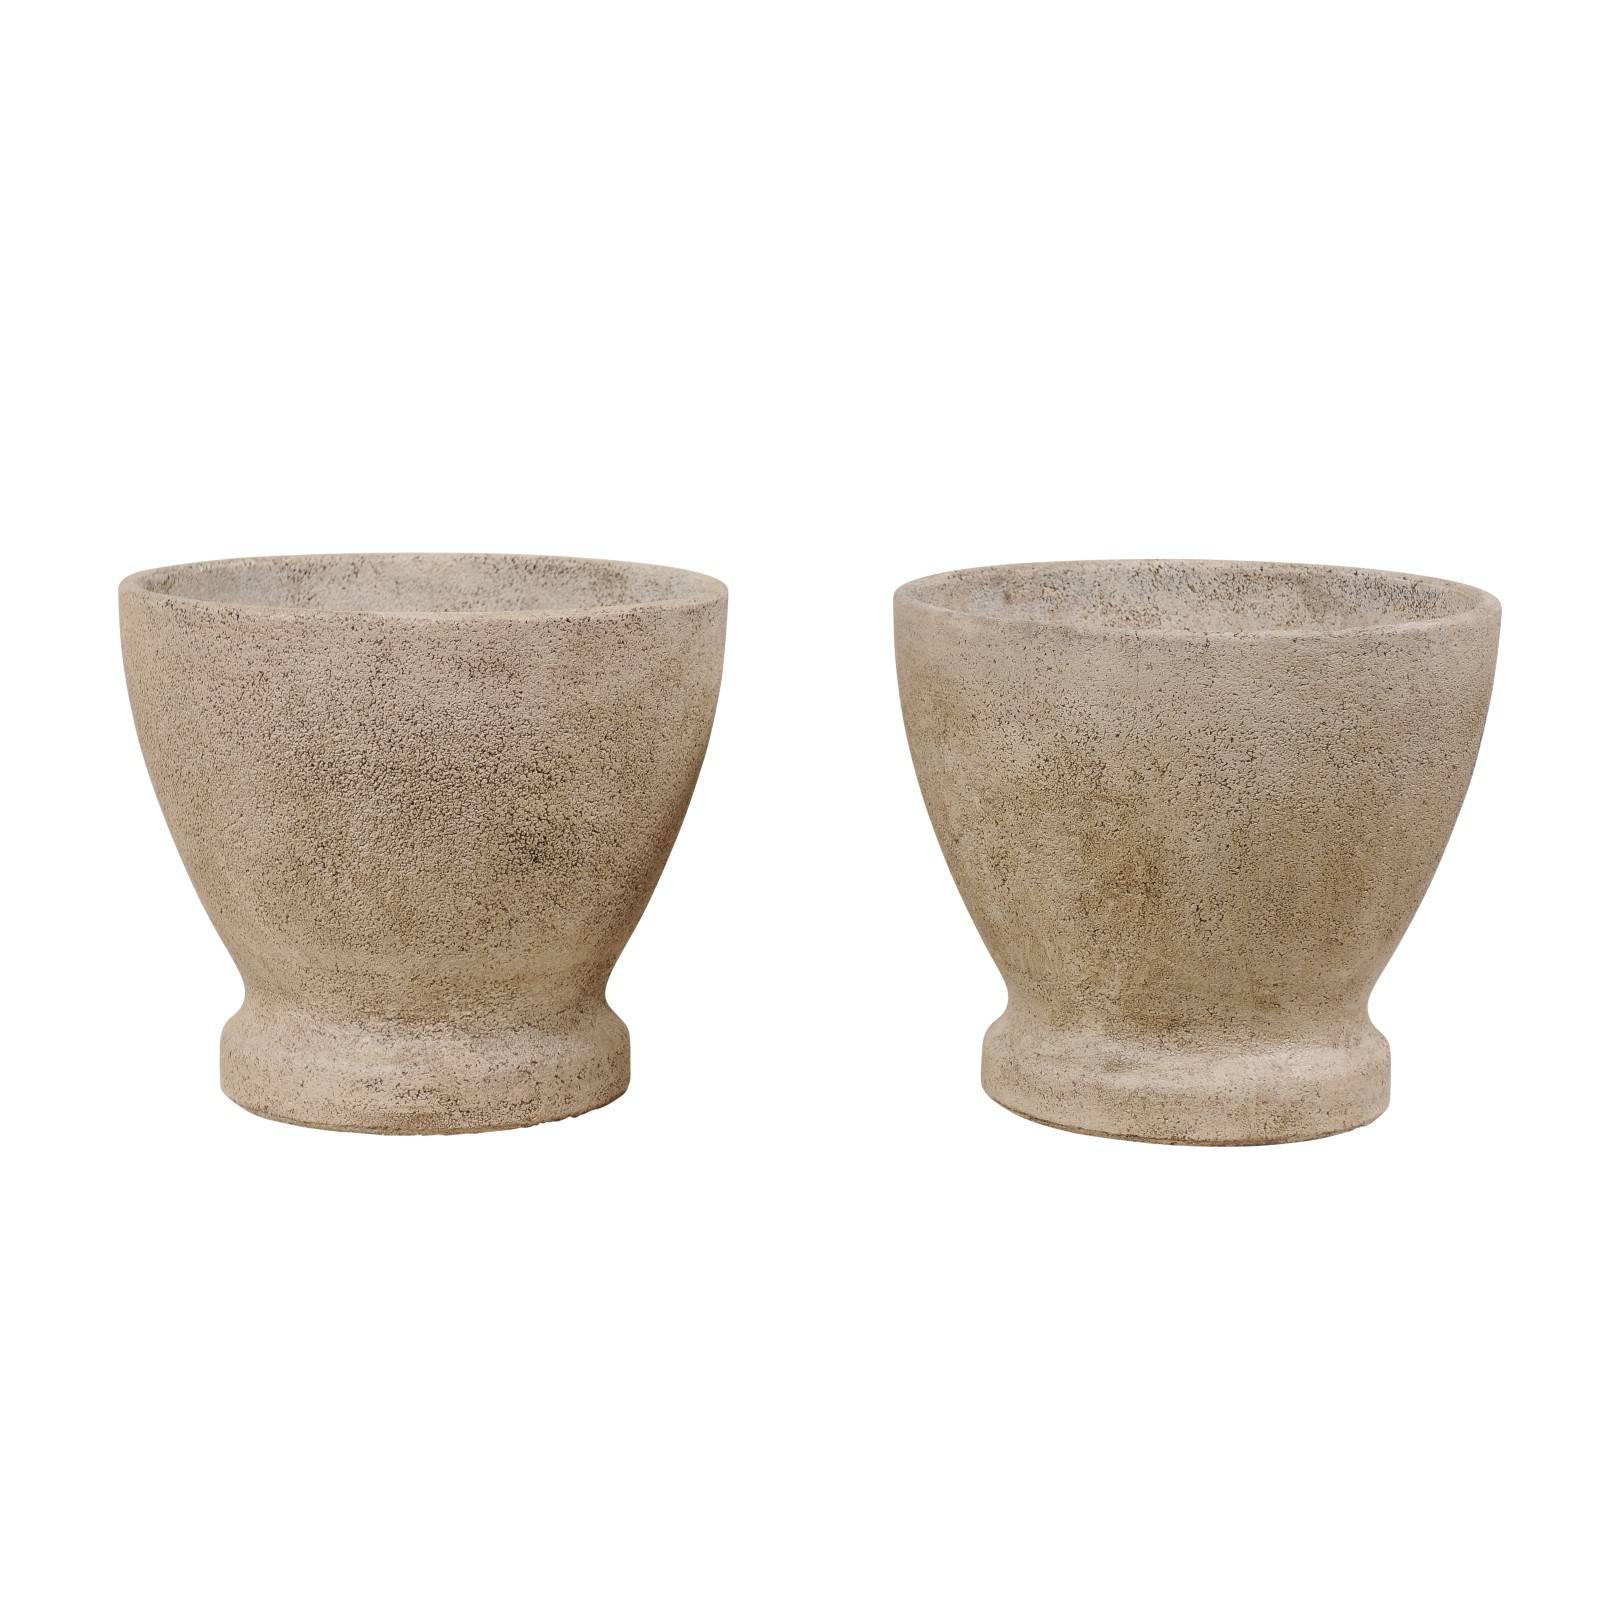 Pair of French Midcentury Cast Stone Round Planters in Natural Grey Hues